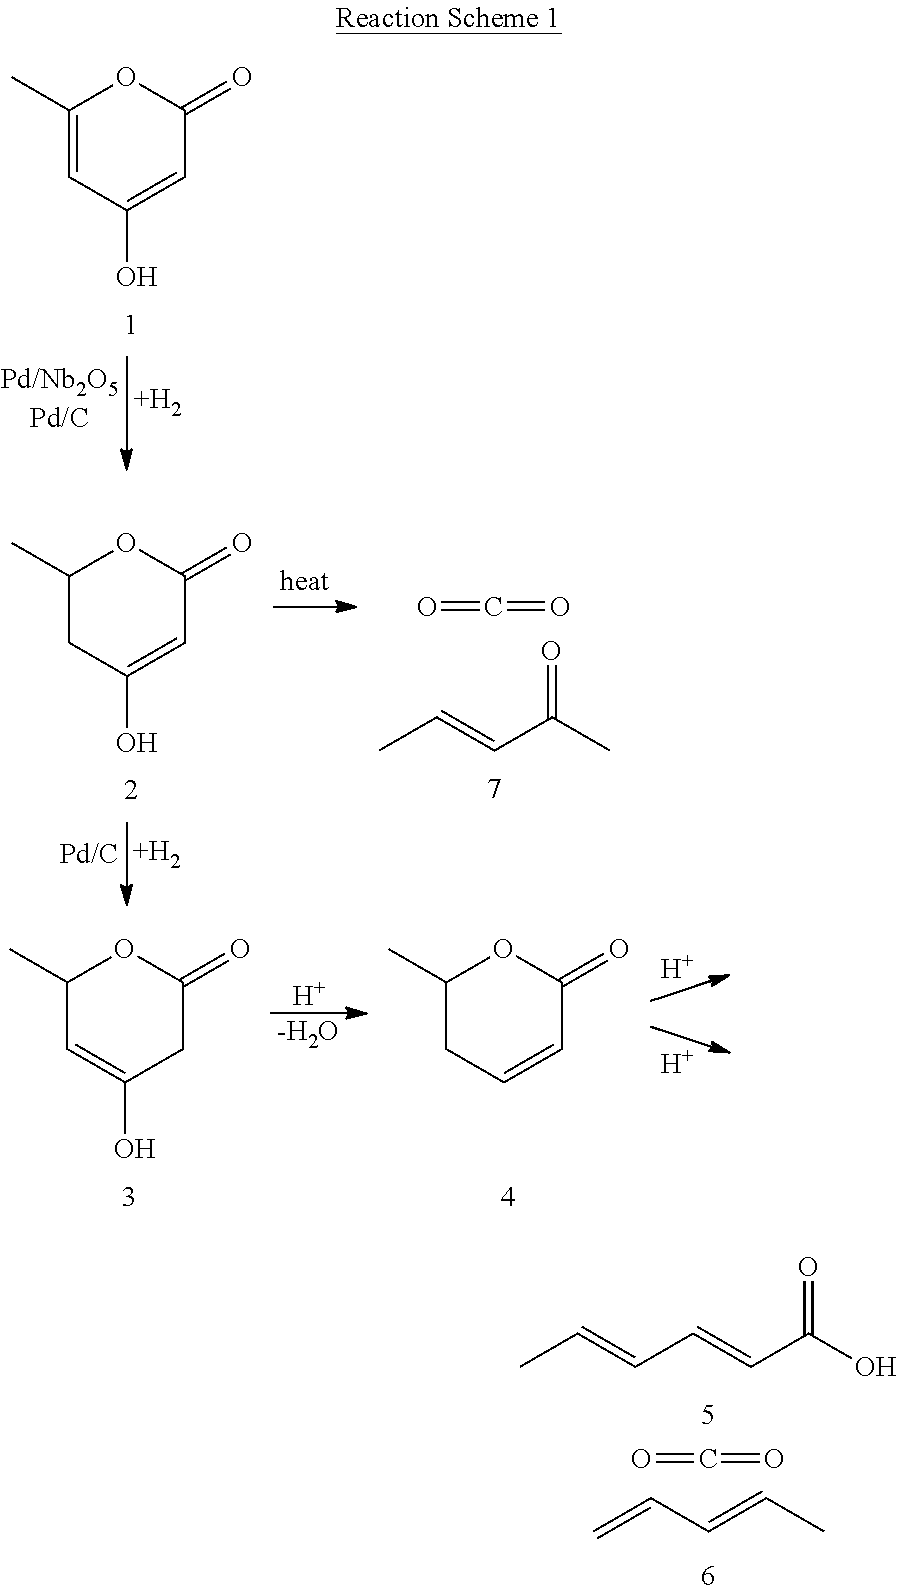 Production of 2,4-hexadienoic acid and 1,3-pentadiene from 6-methyl-5,6-dihydro-2-pyrone